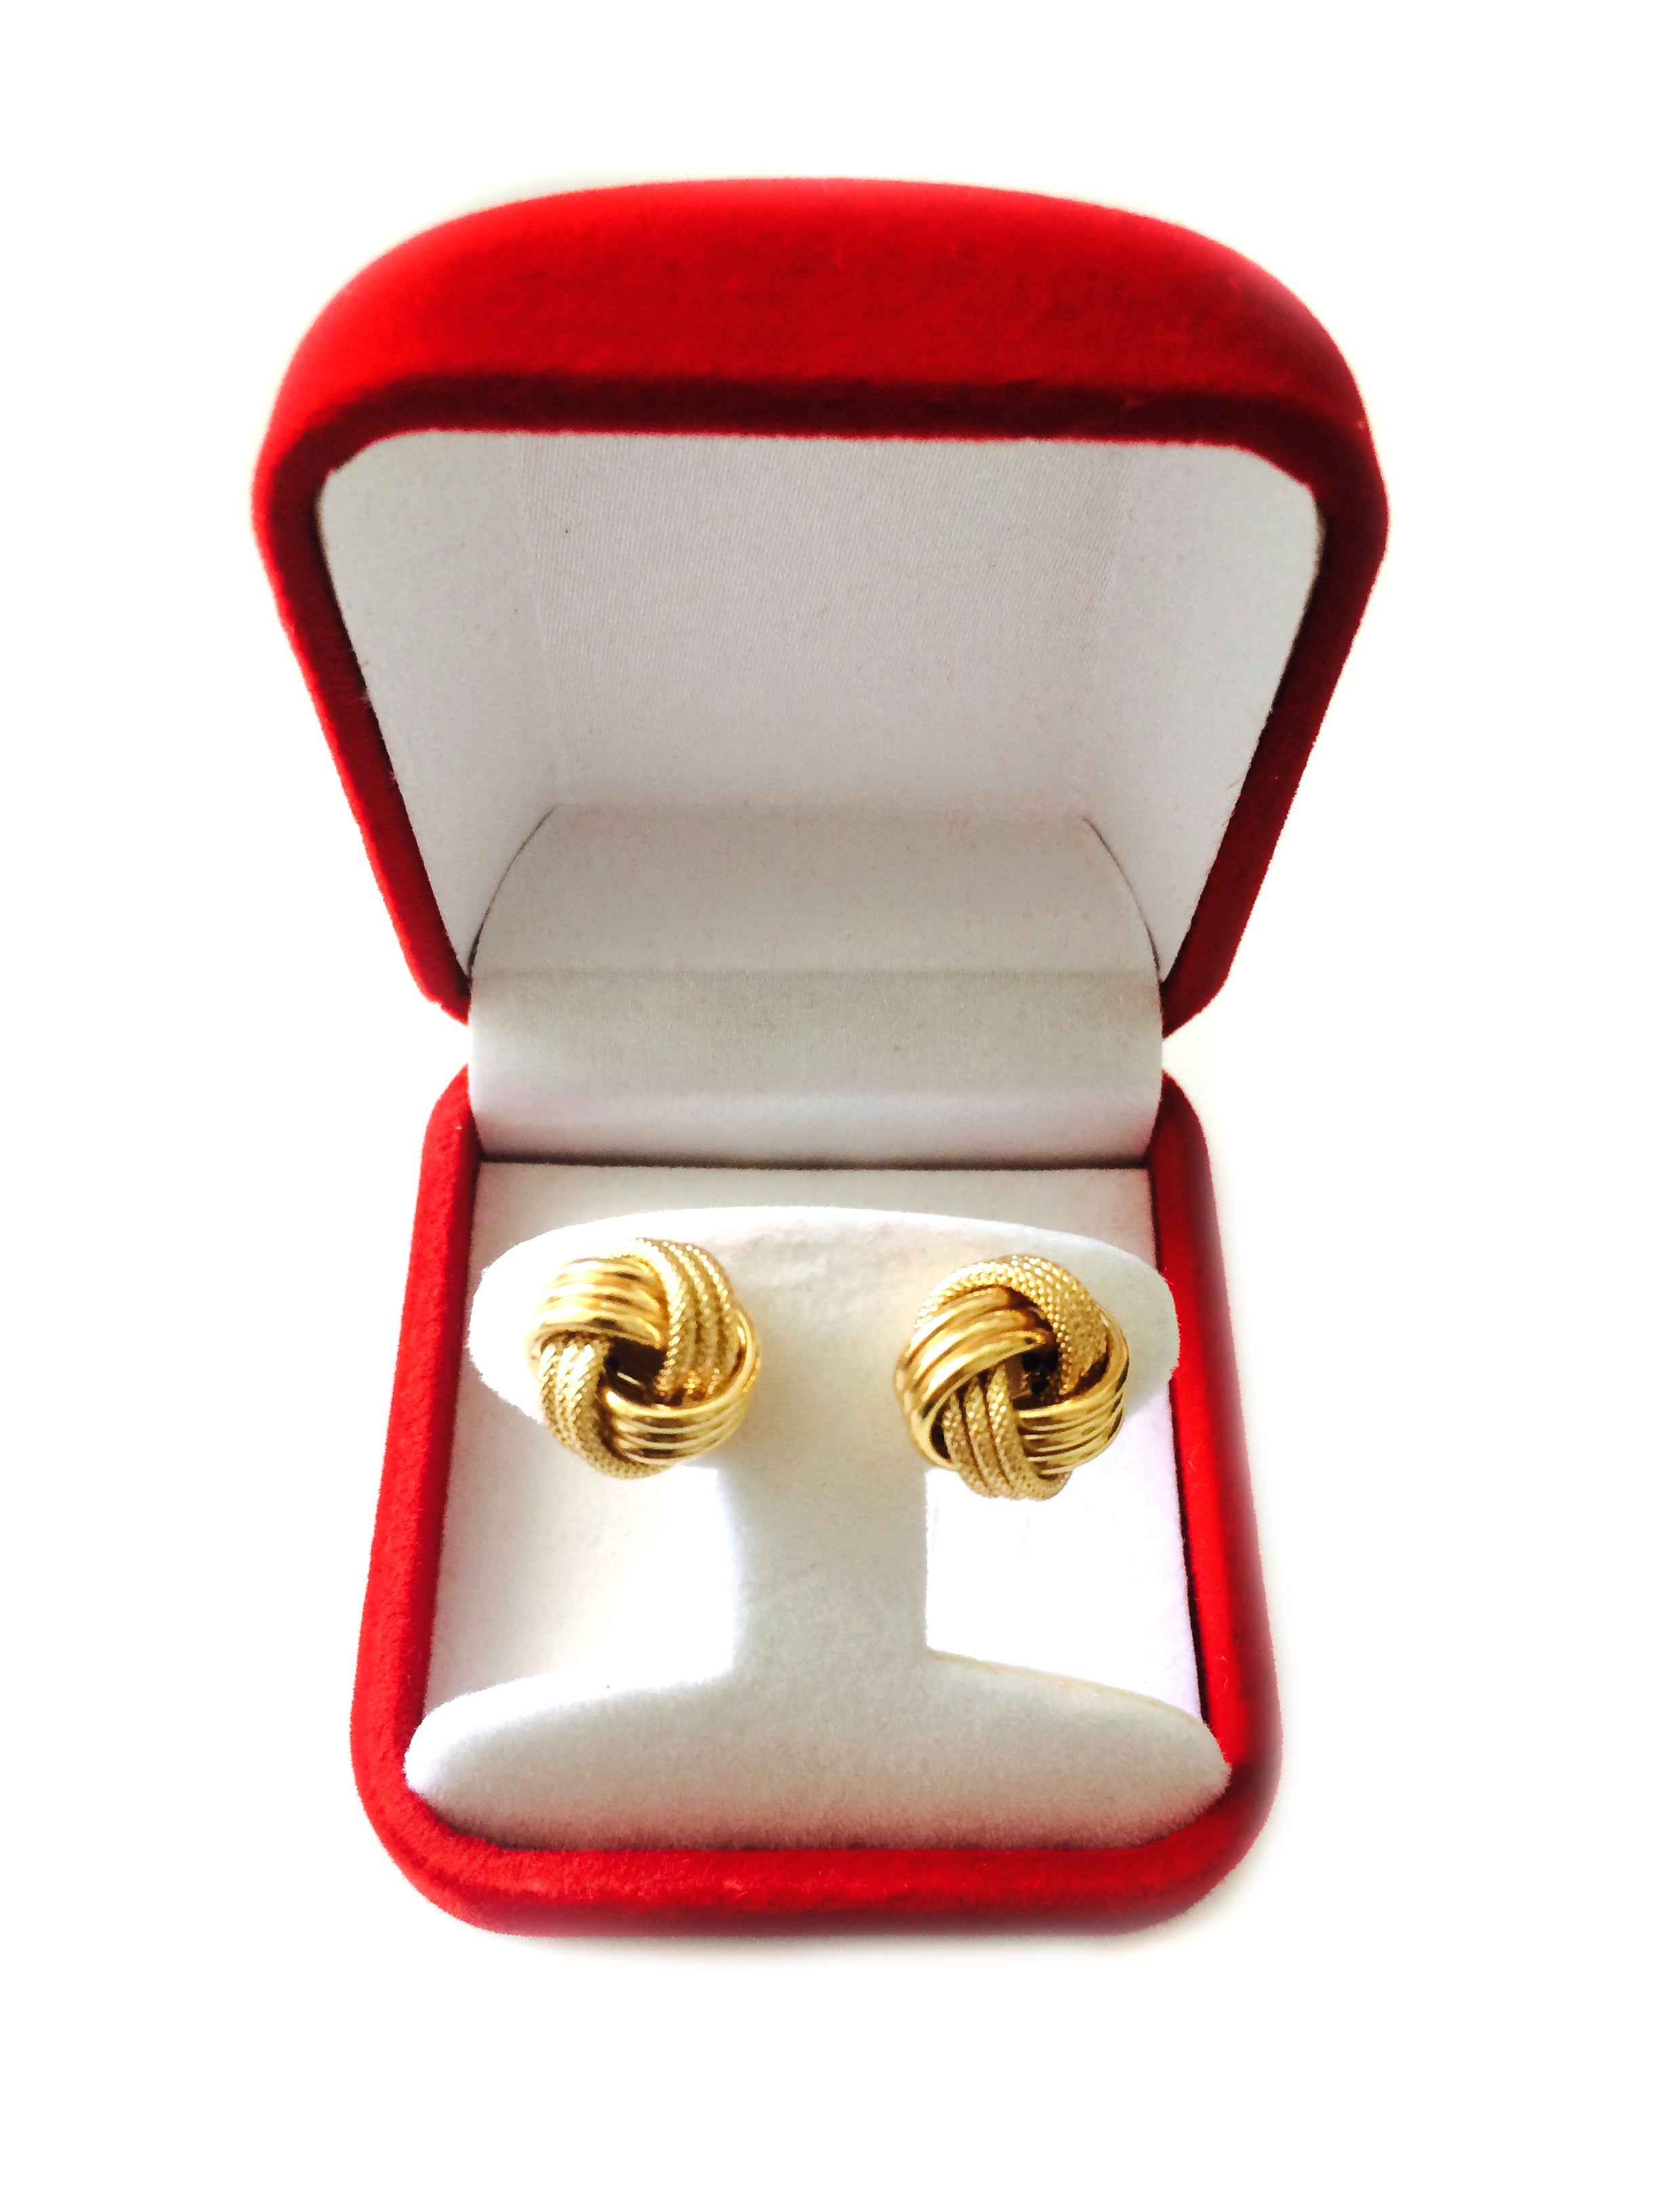 14k Yellow Gold Shiny And Textured Triple Row Love Knot Stud Earrings, 13mm